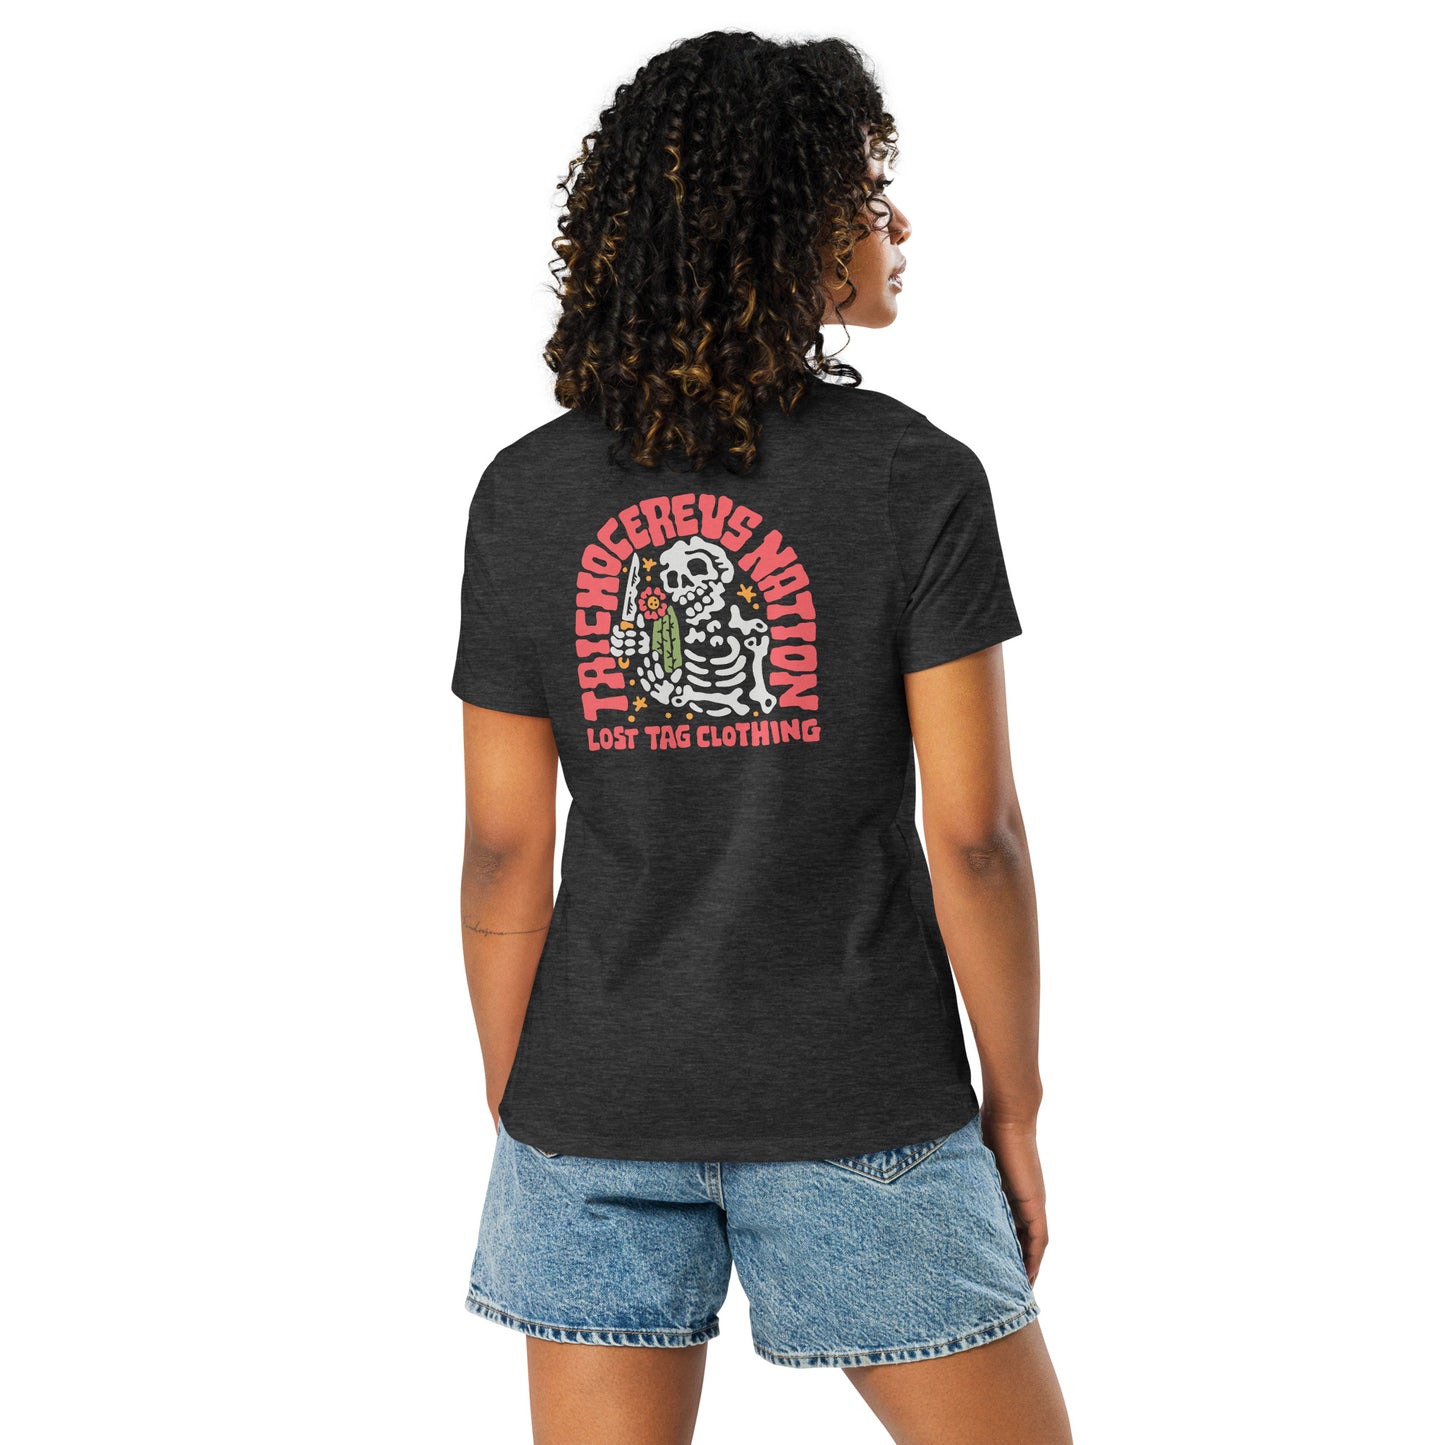 Tricho Nation dual-sided women's relaxed t-shirt